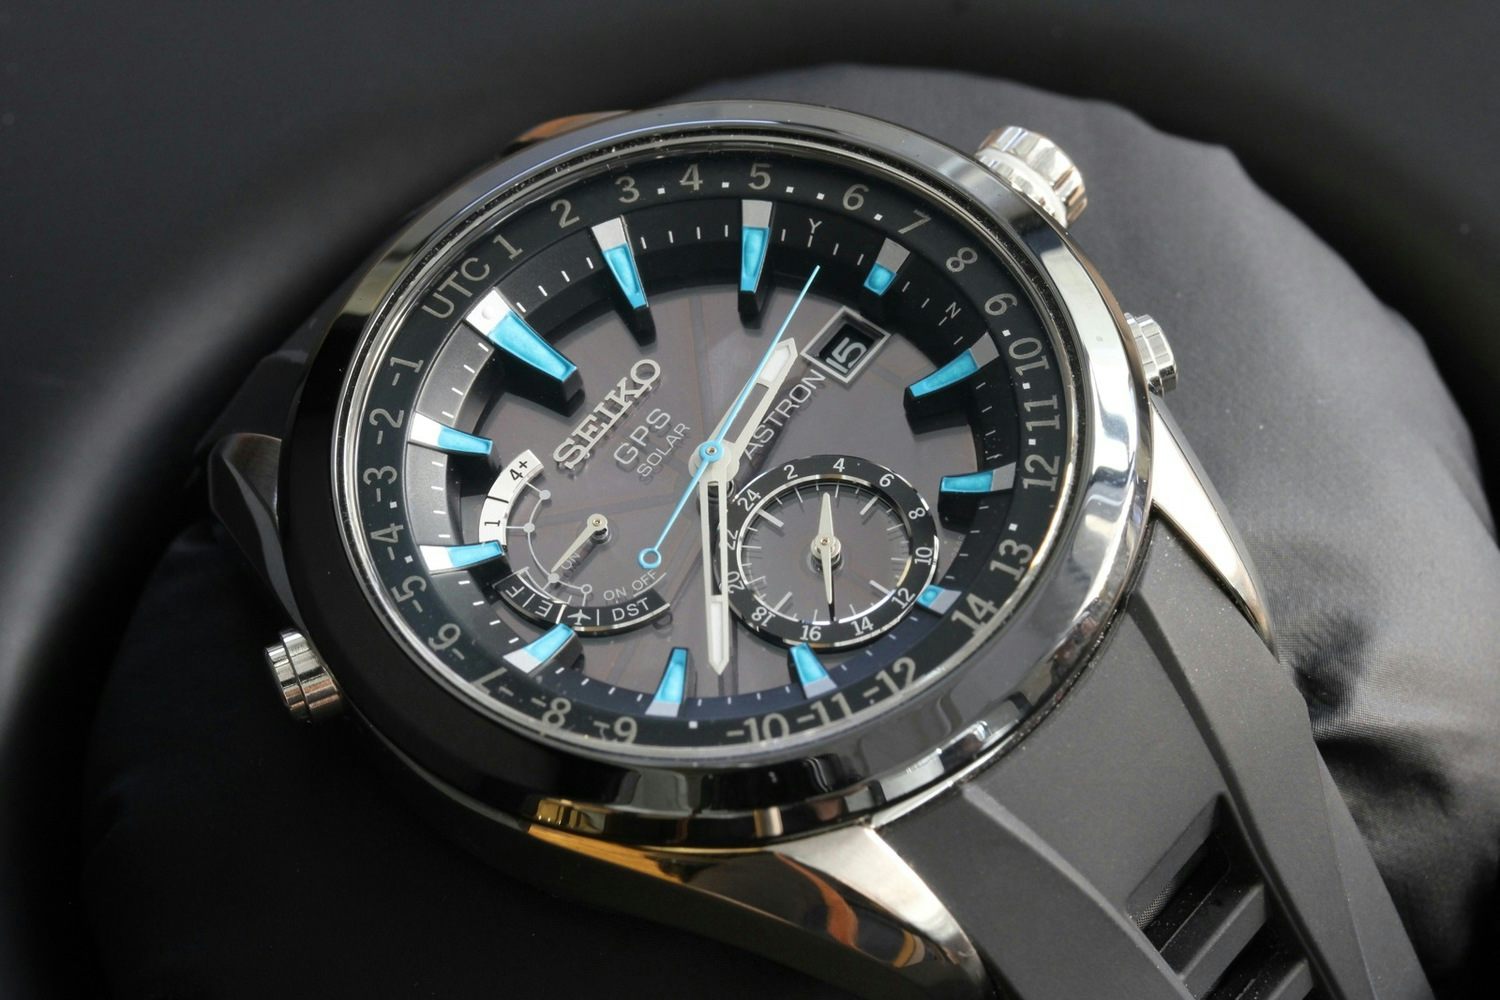 Hands-On: With The Astron - A Solar Powered GPS Watch (Live Pics) - Hodinkee